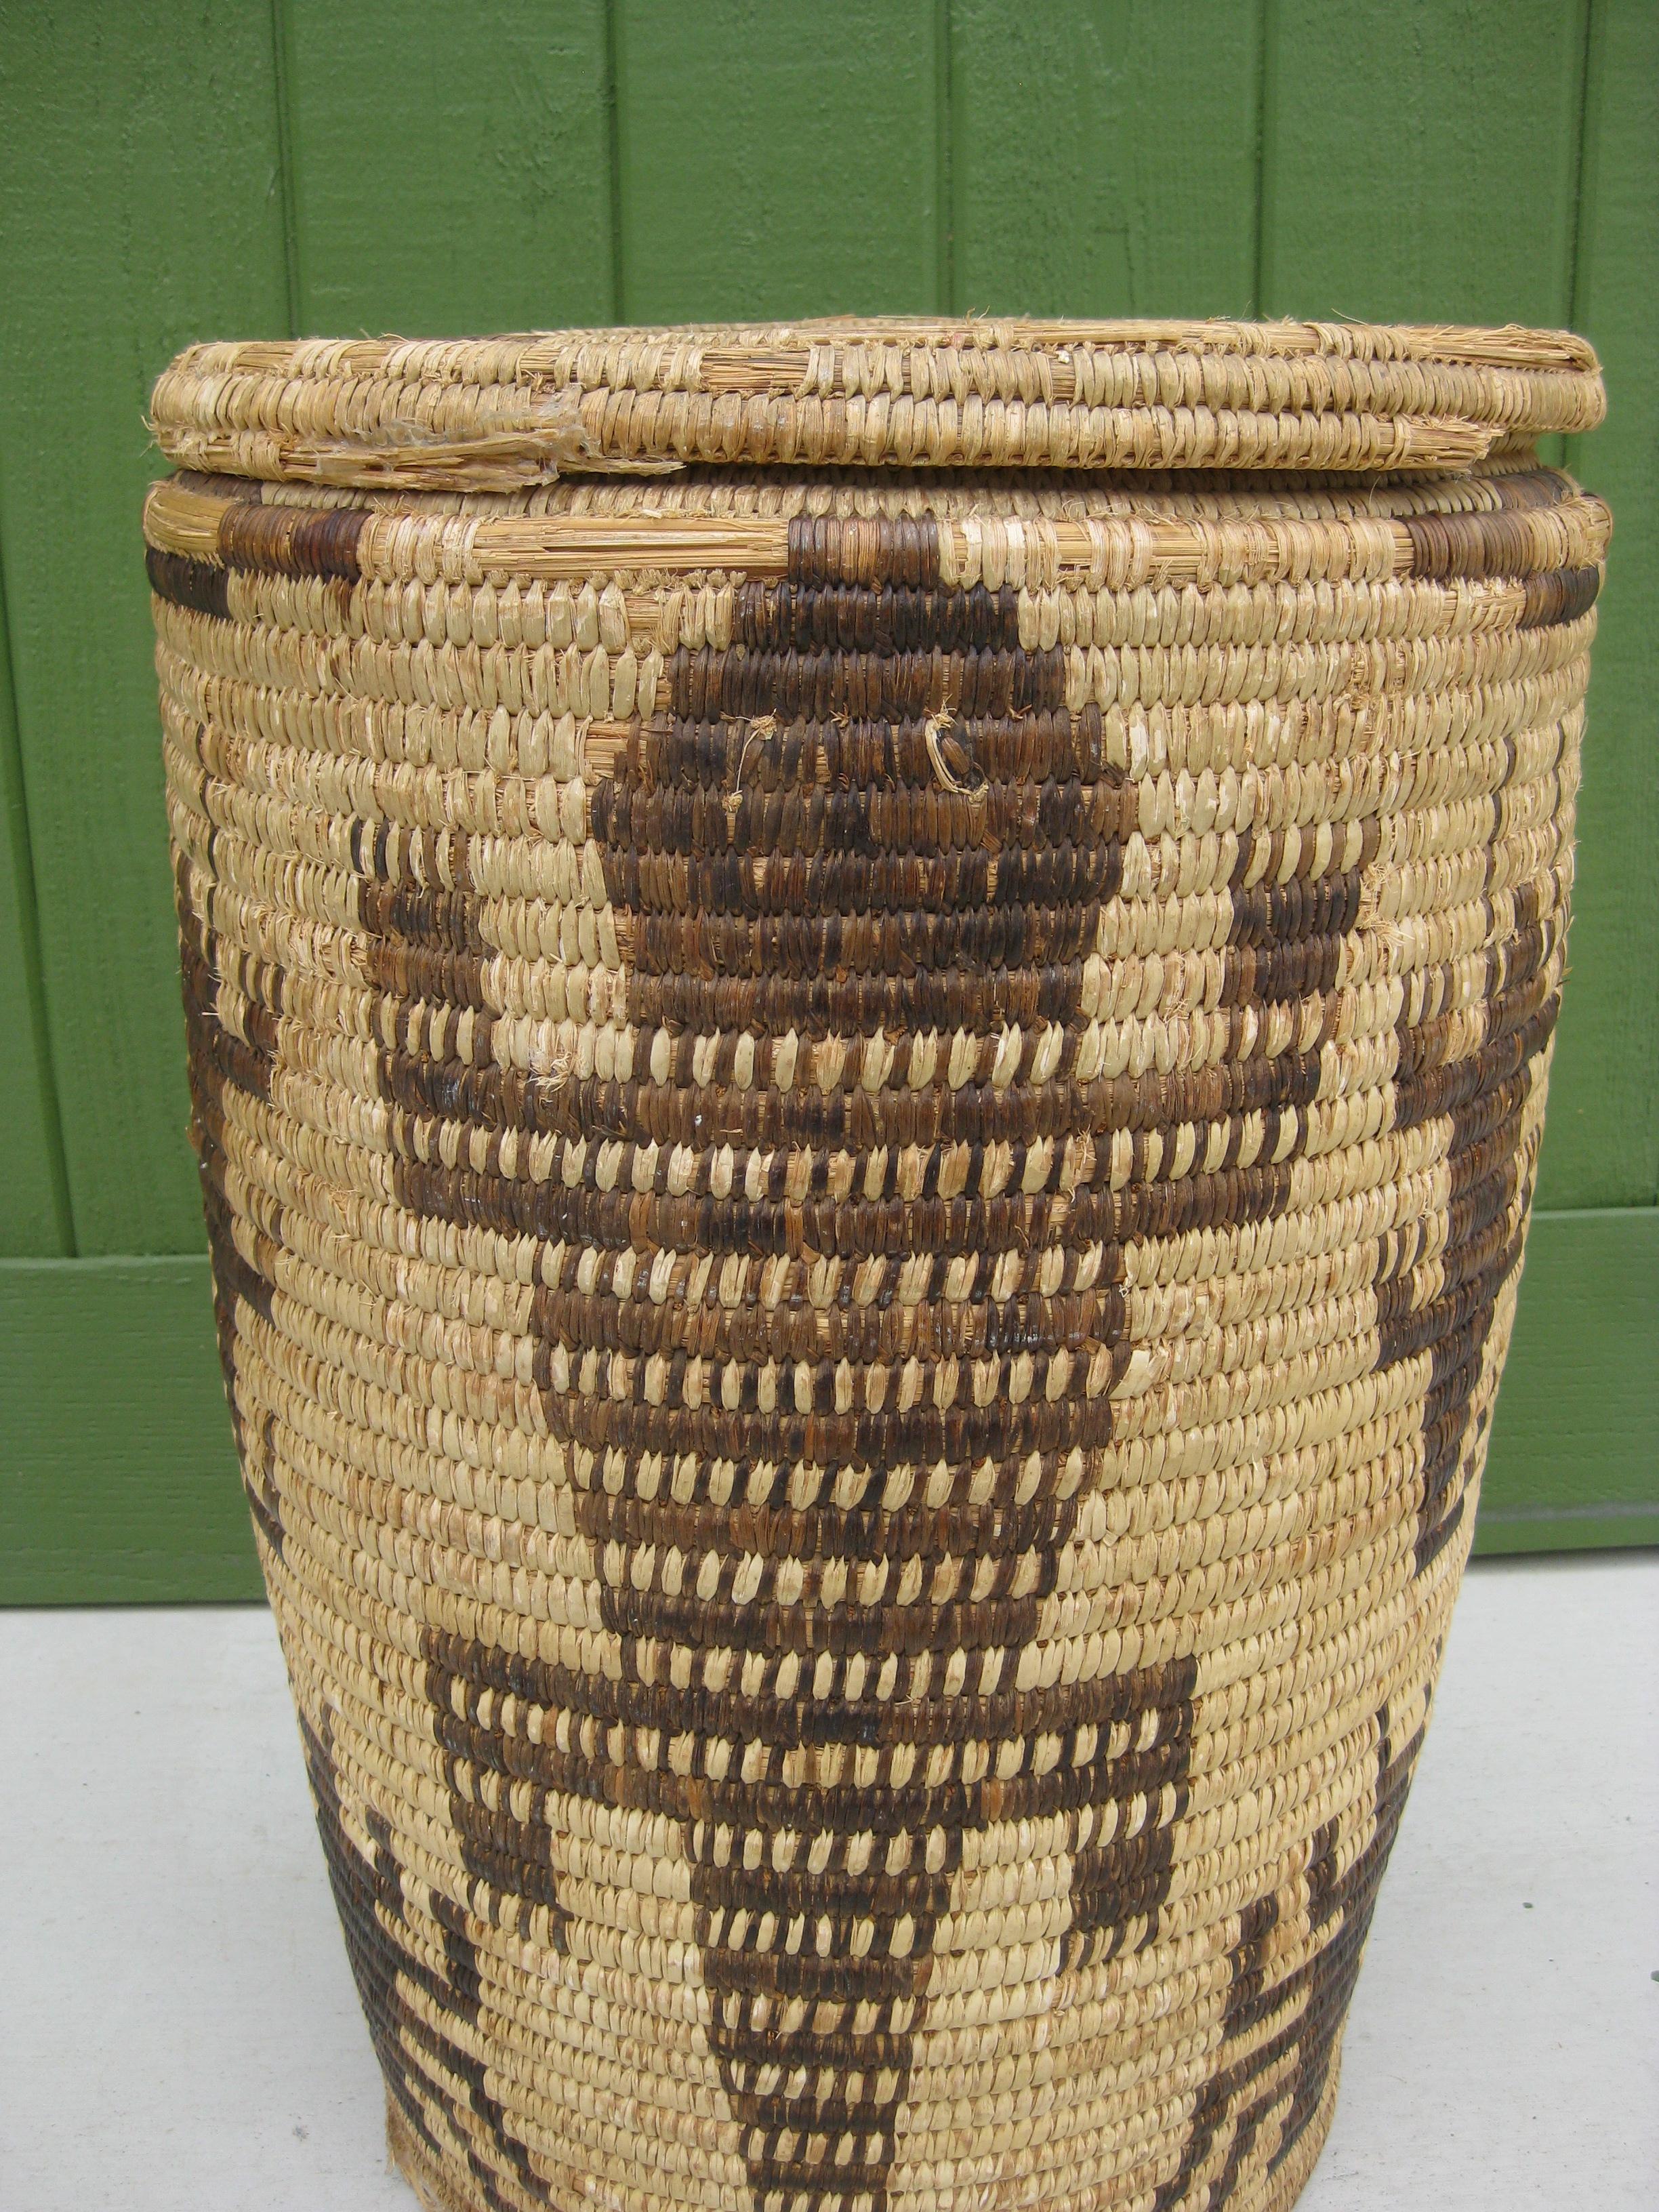 Wonderful vintage hand woven Papago Native American Indian pictorial lidded coil basket olla. Great form and design. Has wonderful figures around the basket. This is one of the largest olla's I have seen. It measures 22